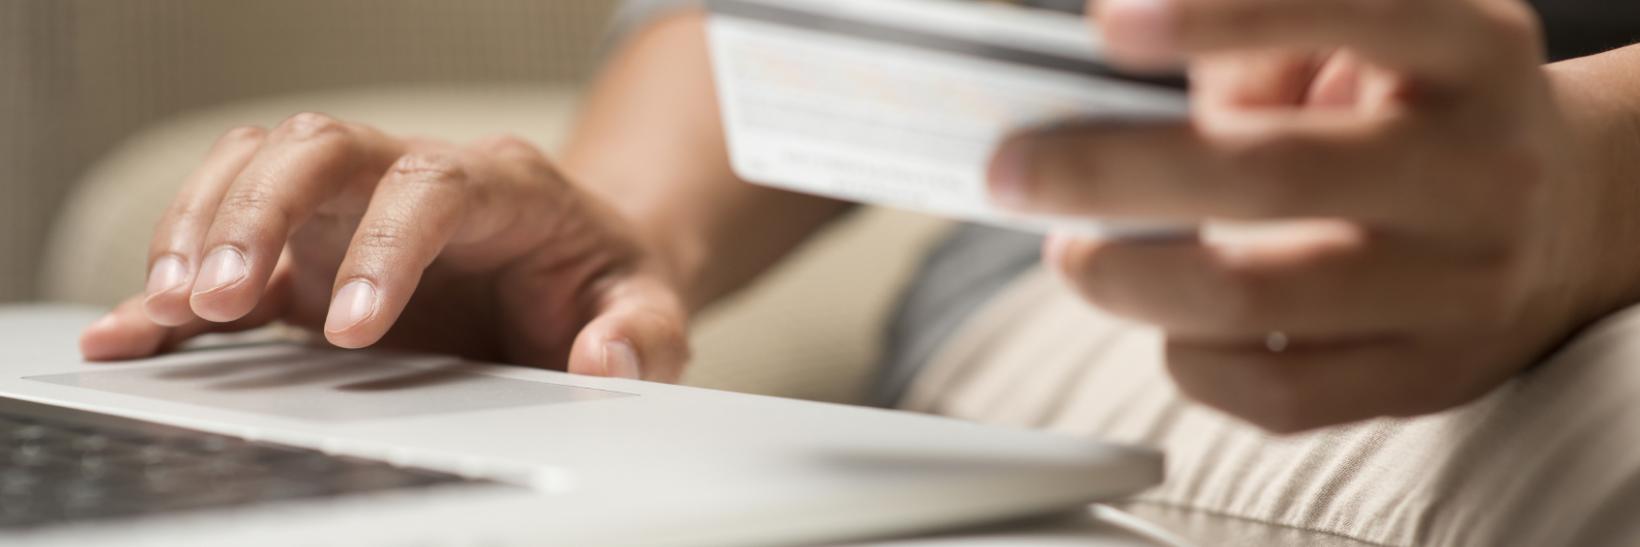 Close up of hands holding credit card in front of a laptop 